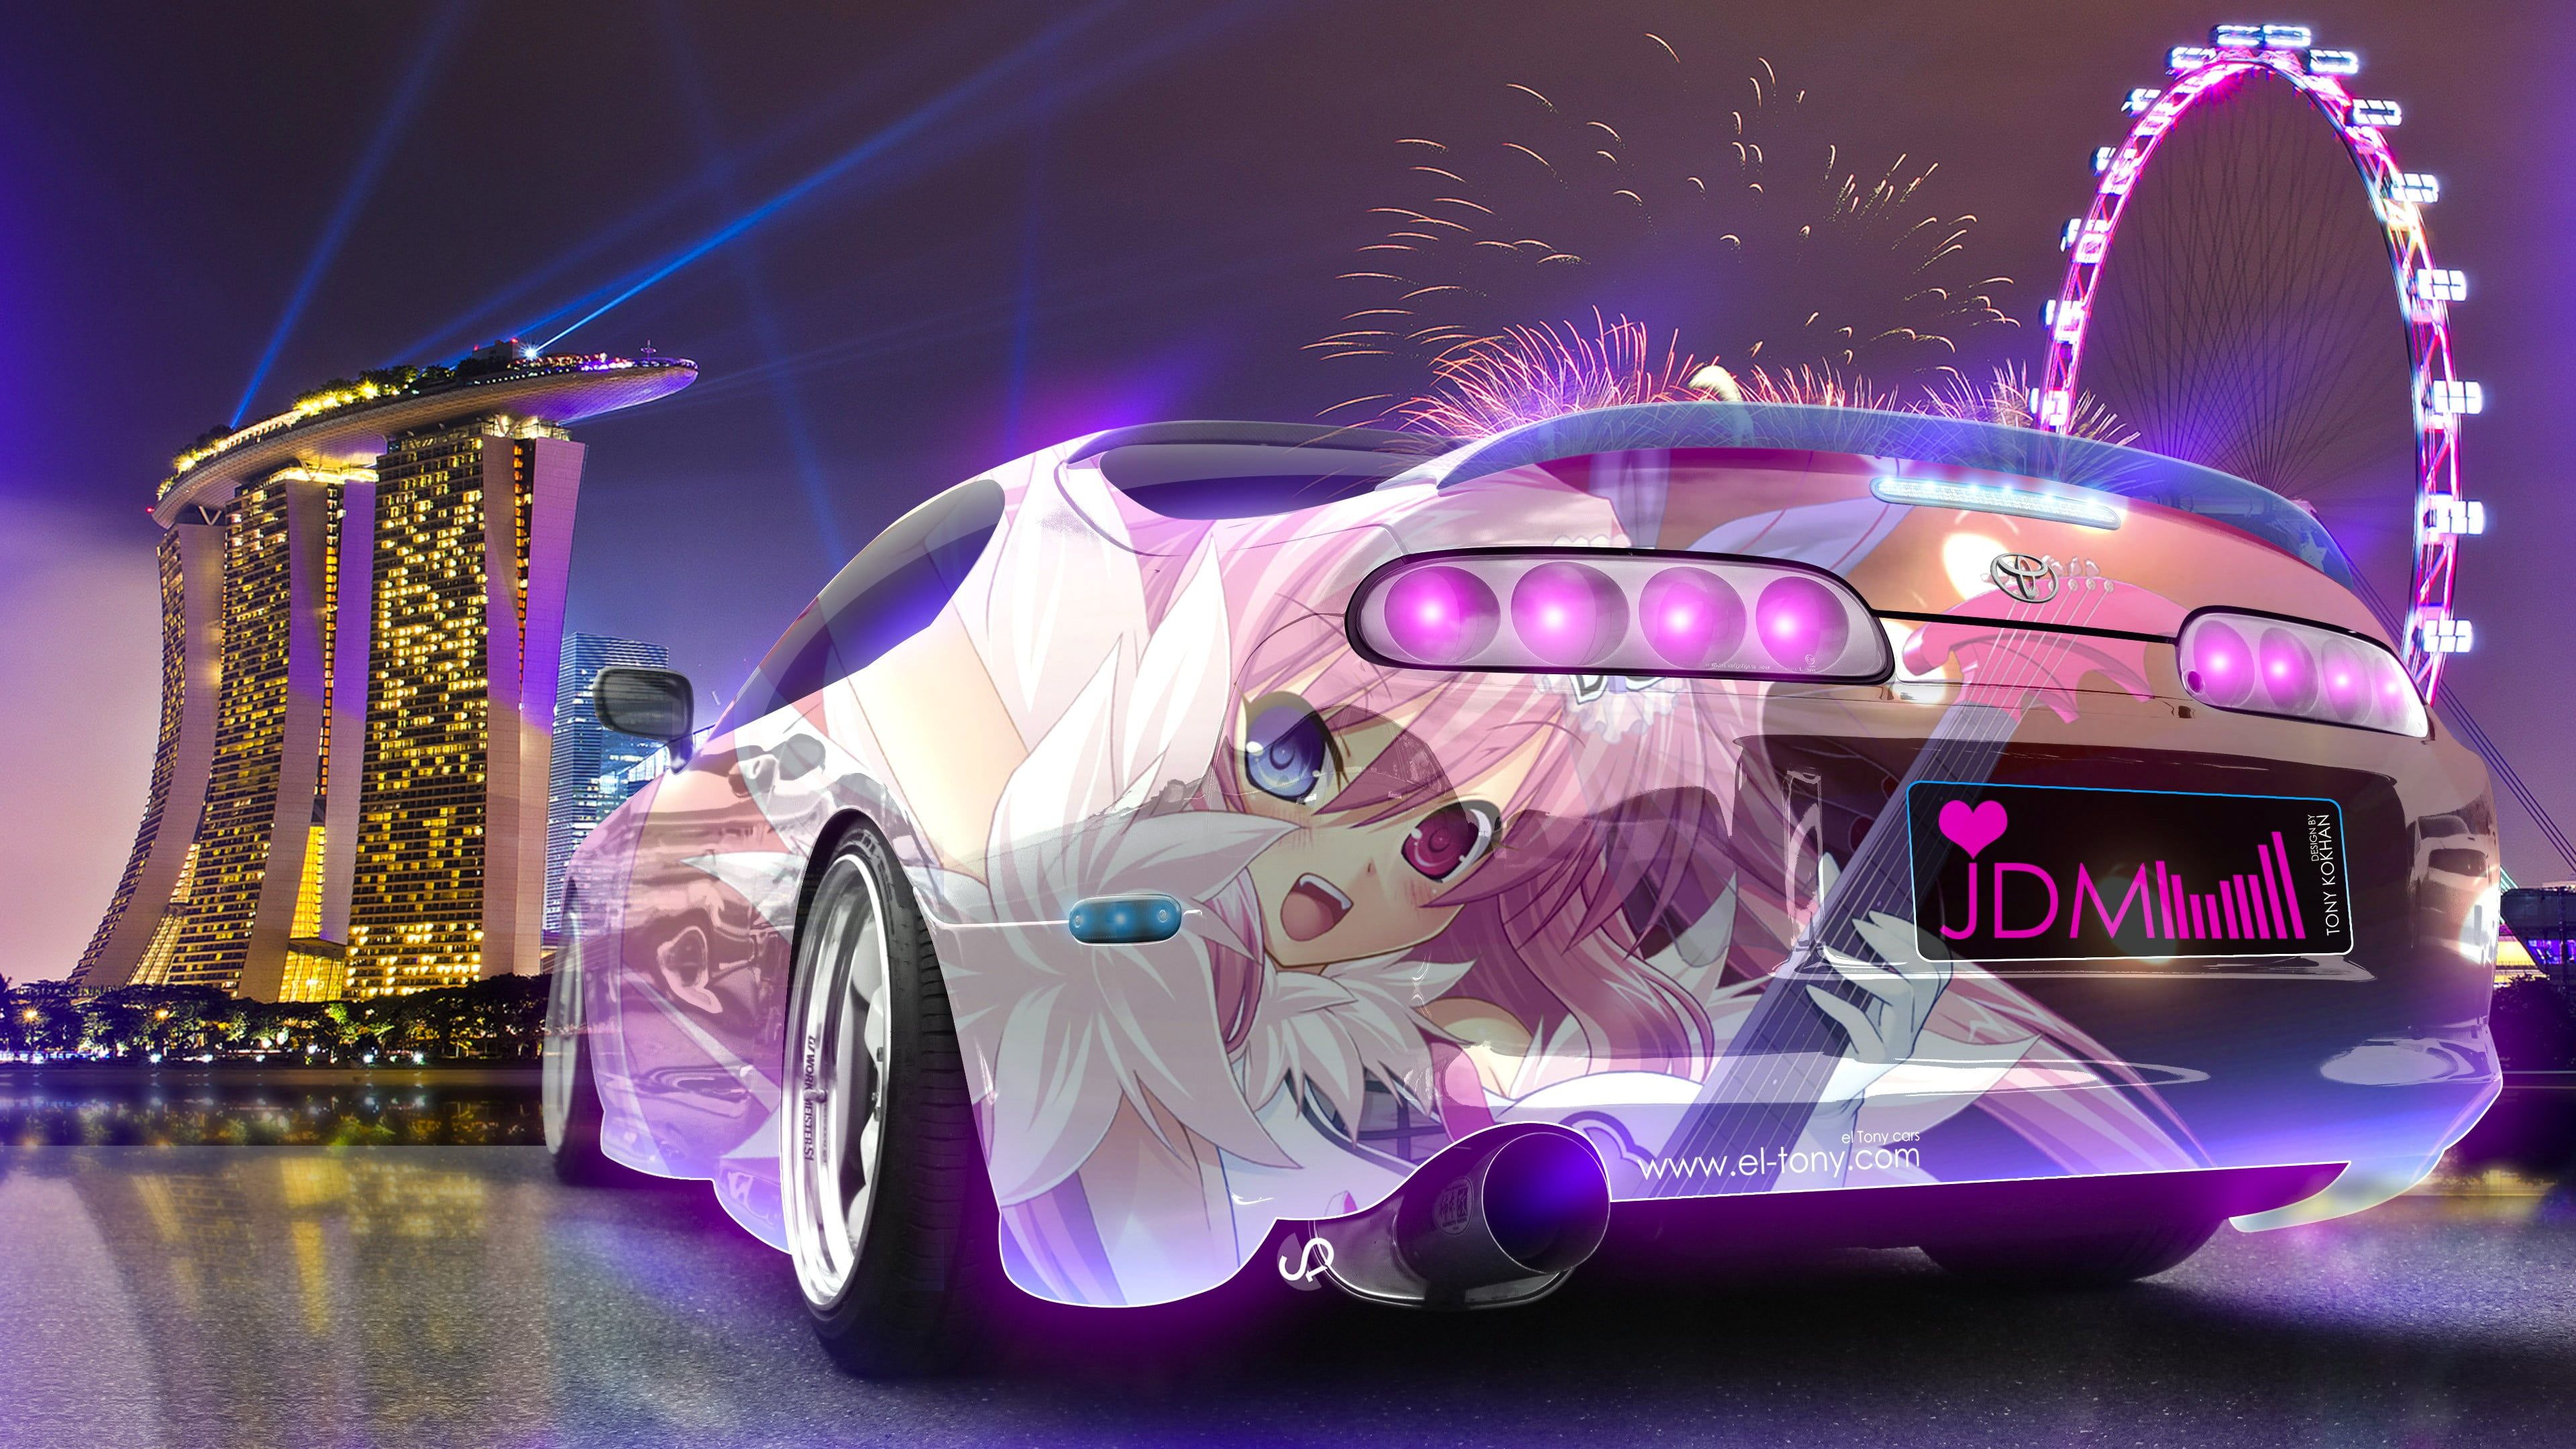 animated character printed white coupe wallpaper Super Car Tony Kokhan #colorful Toyota Supra #JDM #anime K #wallpap. Toyota supra, Toyota supra mk Japan cars